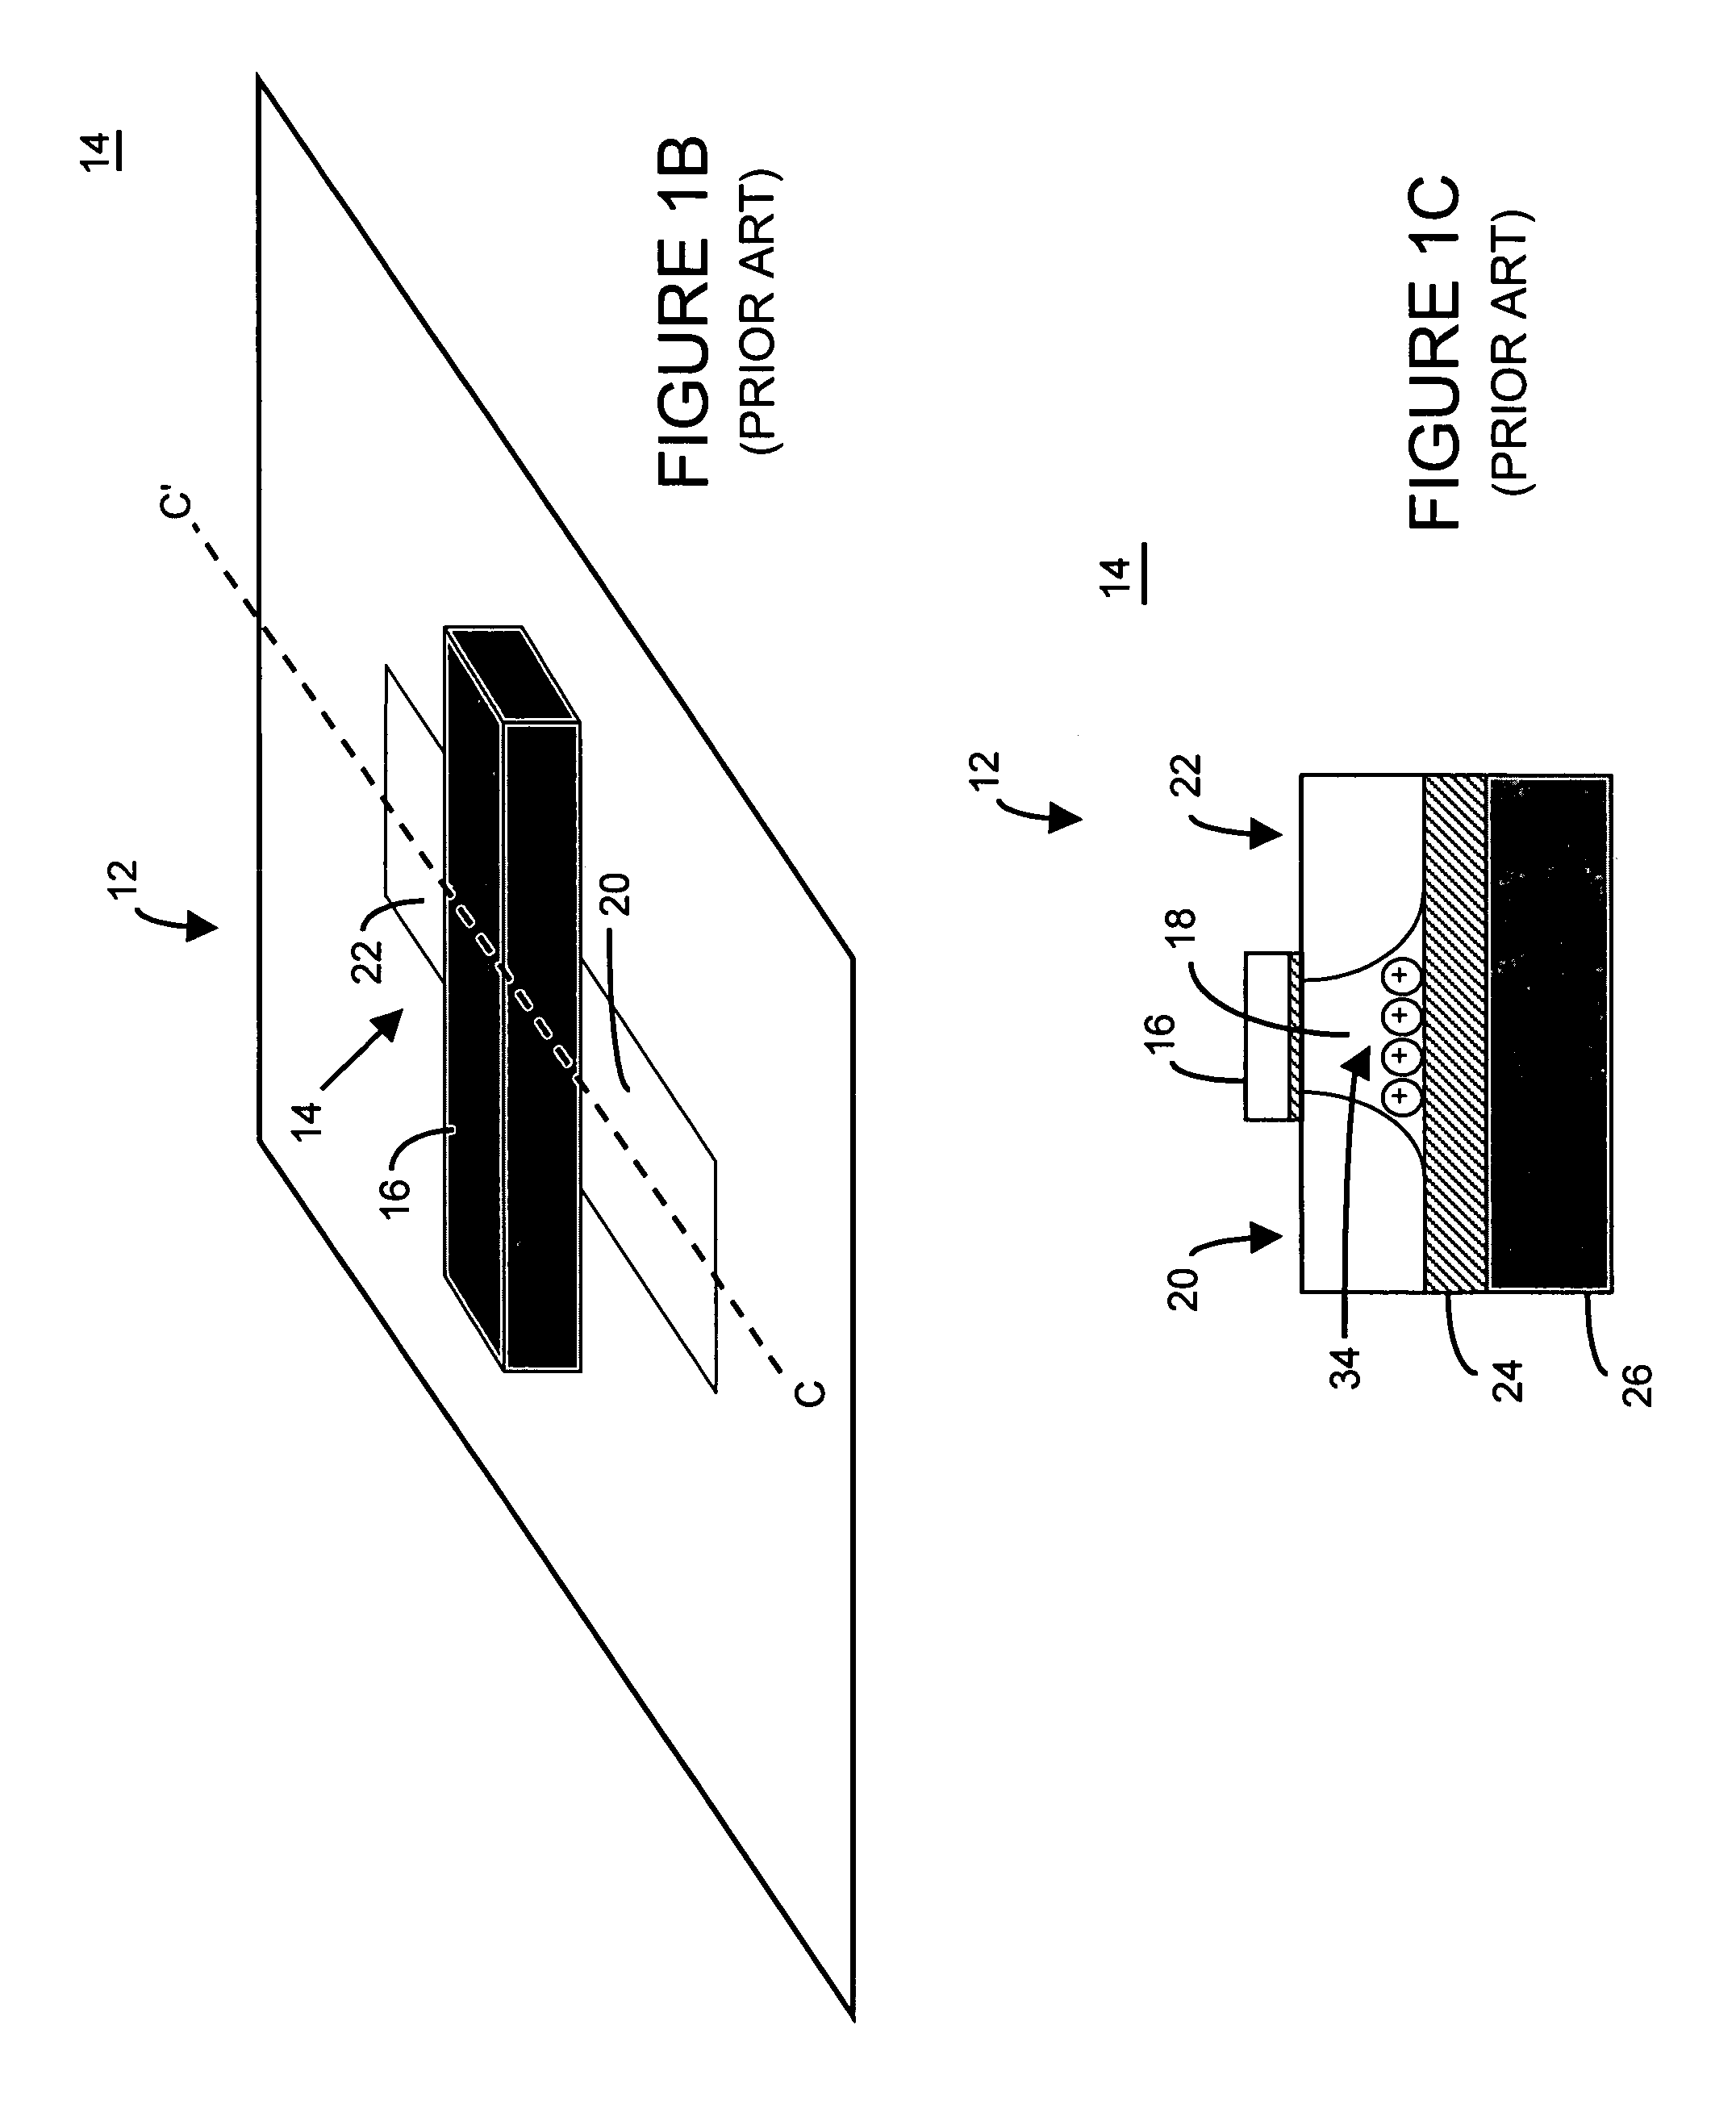 Circuitry for and method of improving statistical distribution of integrated circuits